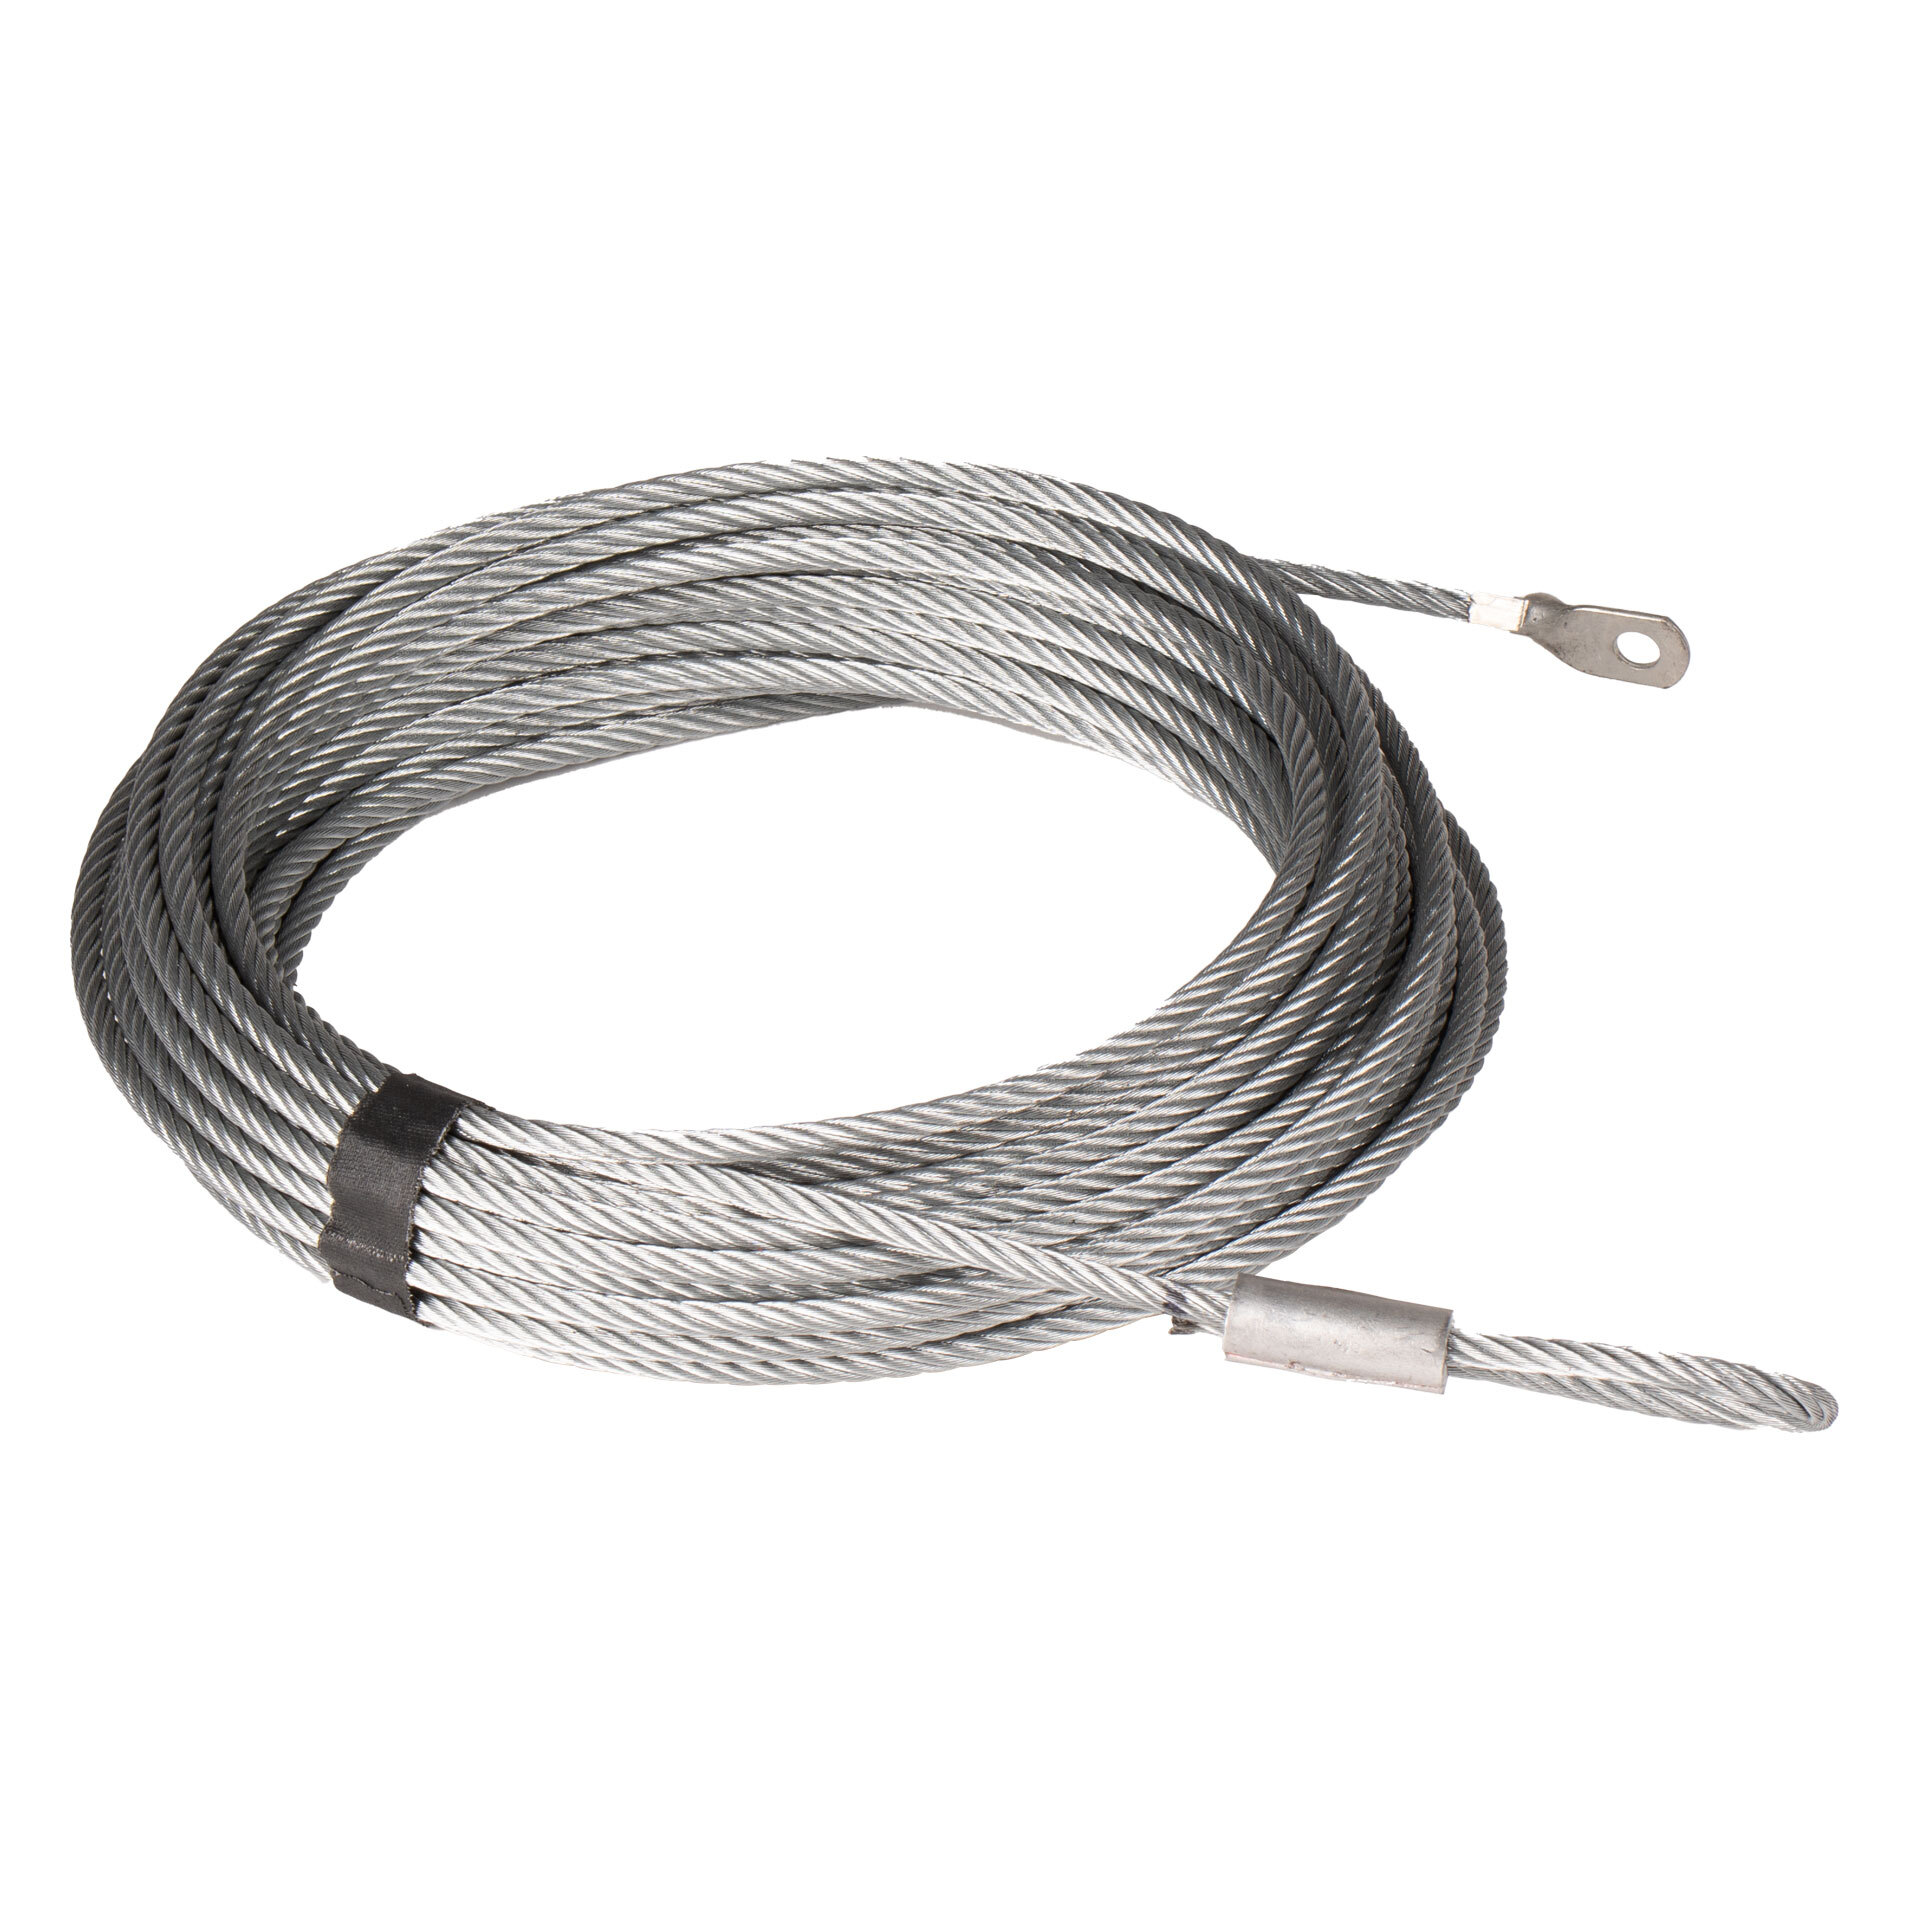 WARN® 2500 lb Wire Rope